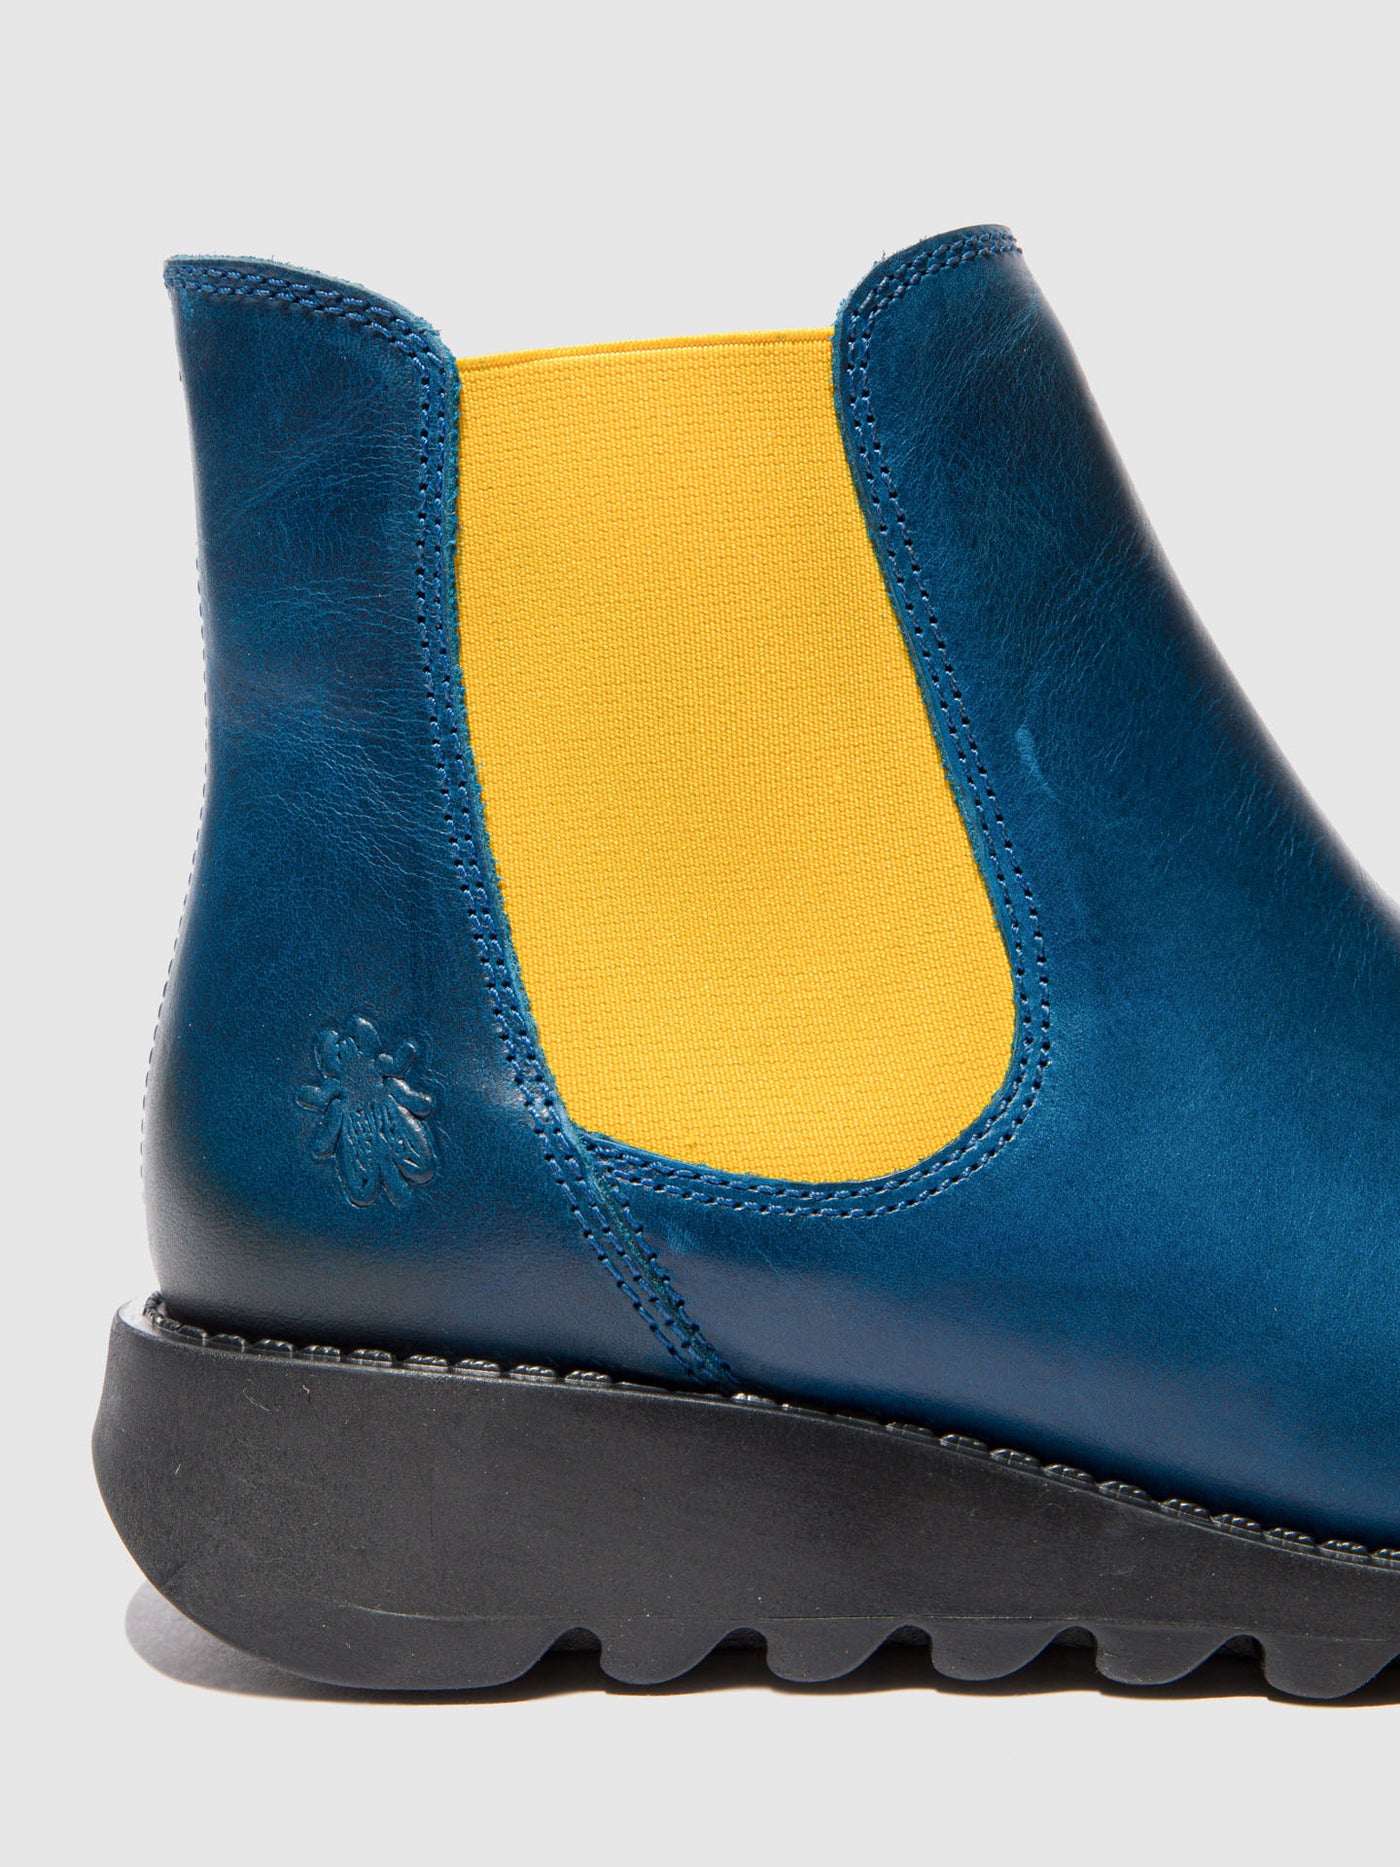 Chelsea Ankle Boots SALV RUG ROYAL BLUE (MUSTARD ELASTIC)